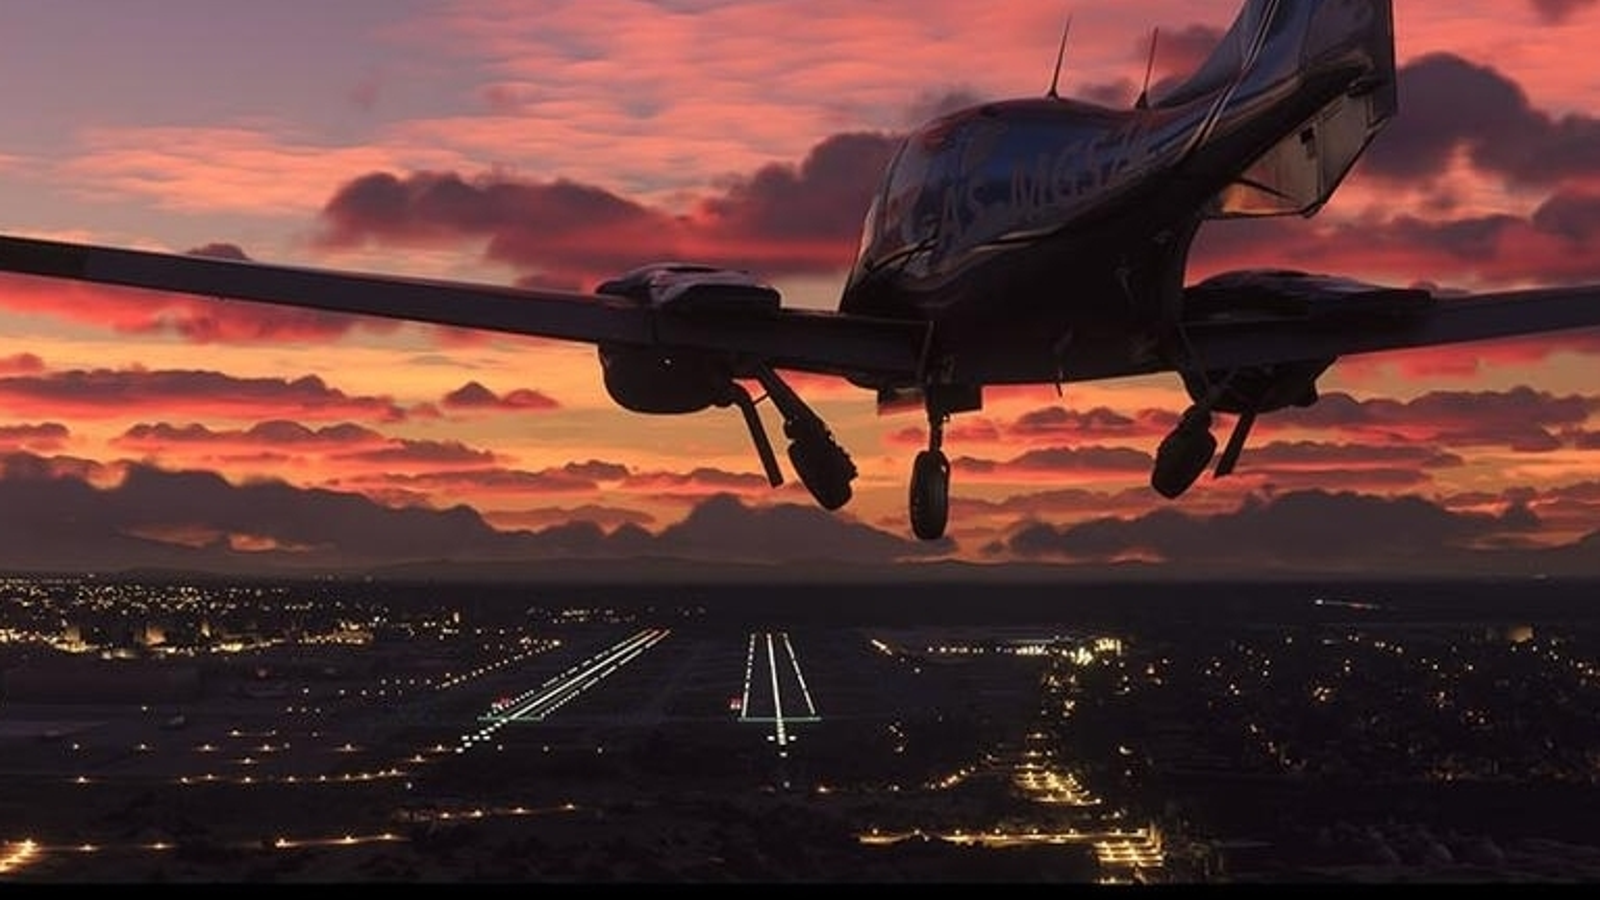 Microsoft Flight Simulator 2020 Debuts August 18 - One Mile at a Time